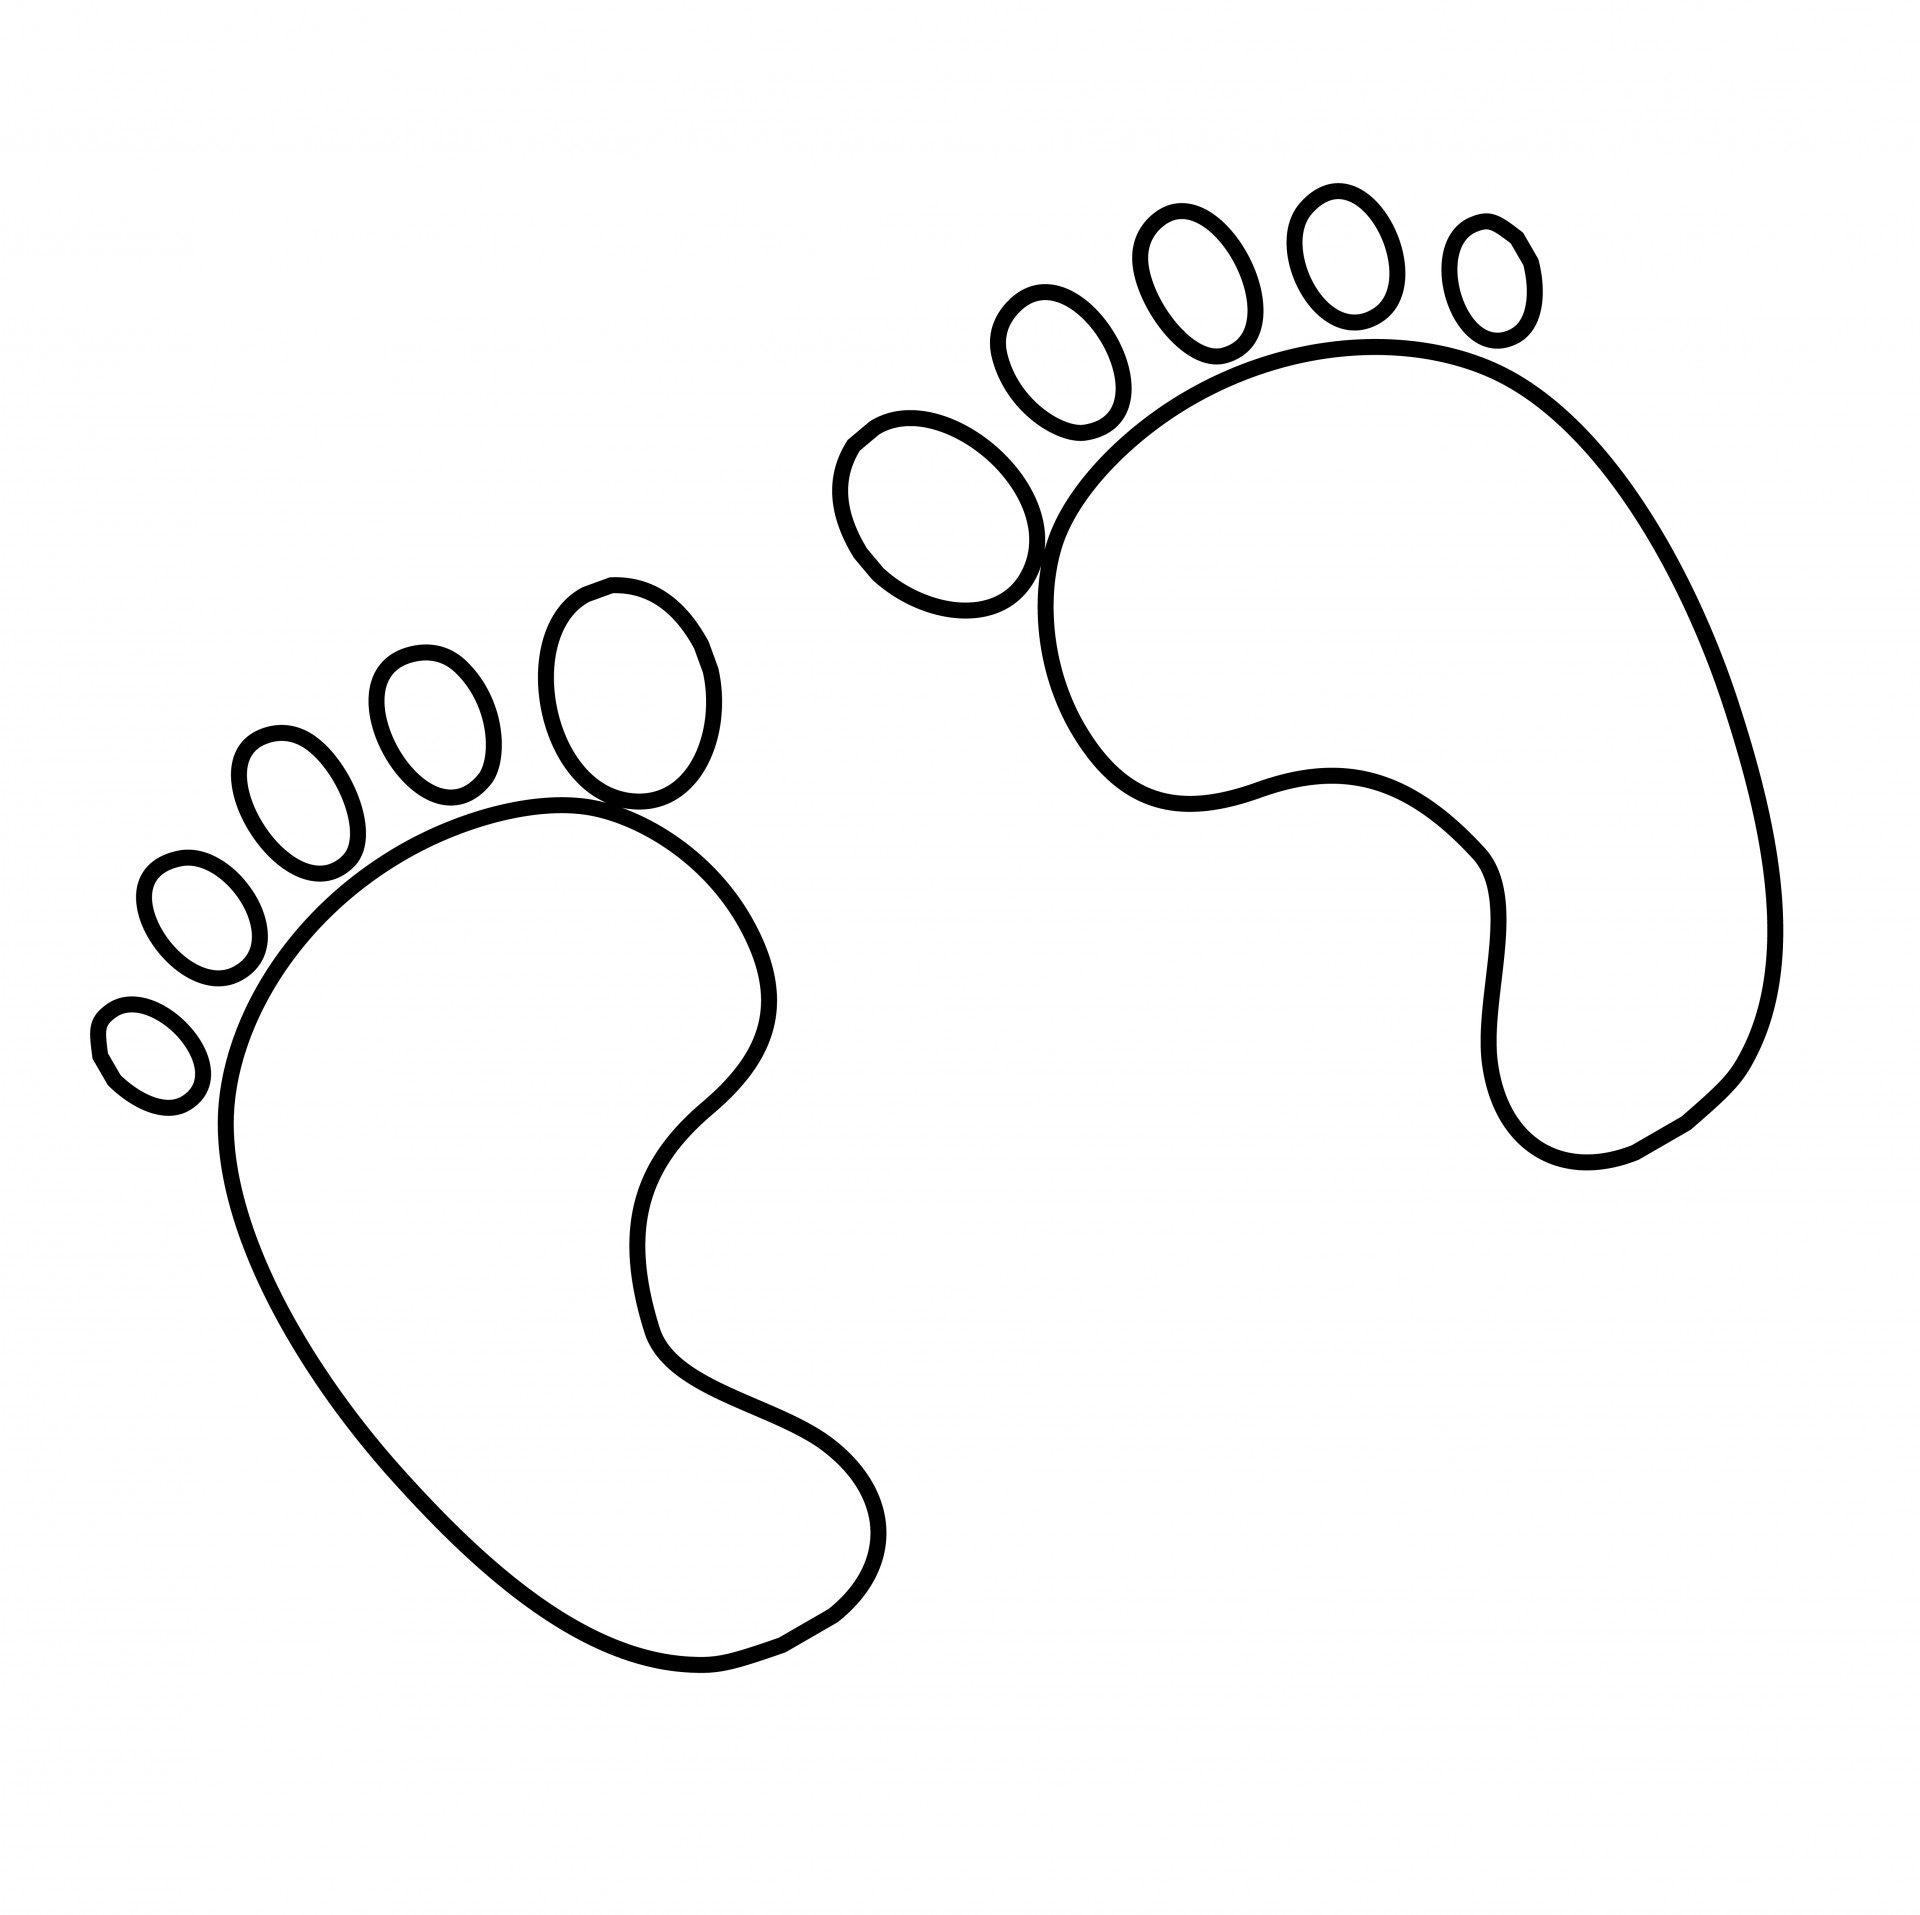 Footprints free stock photo. Baby clipart outline